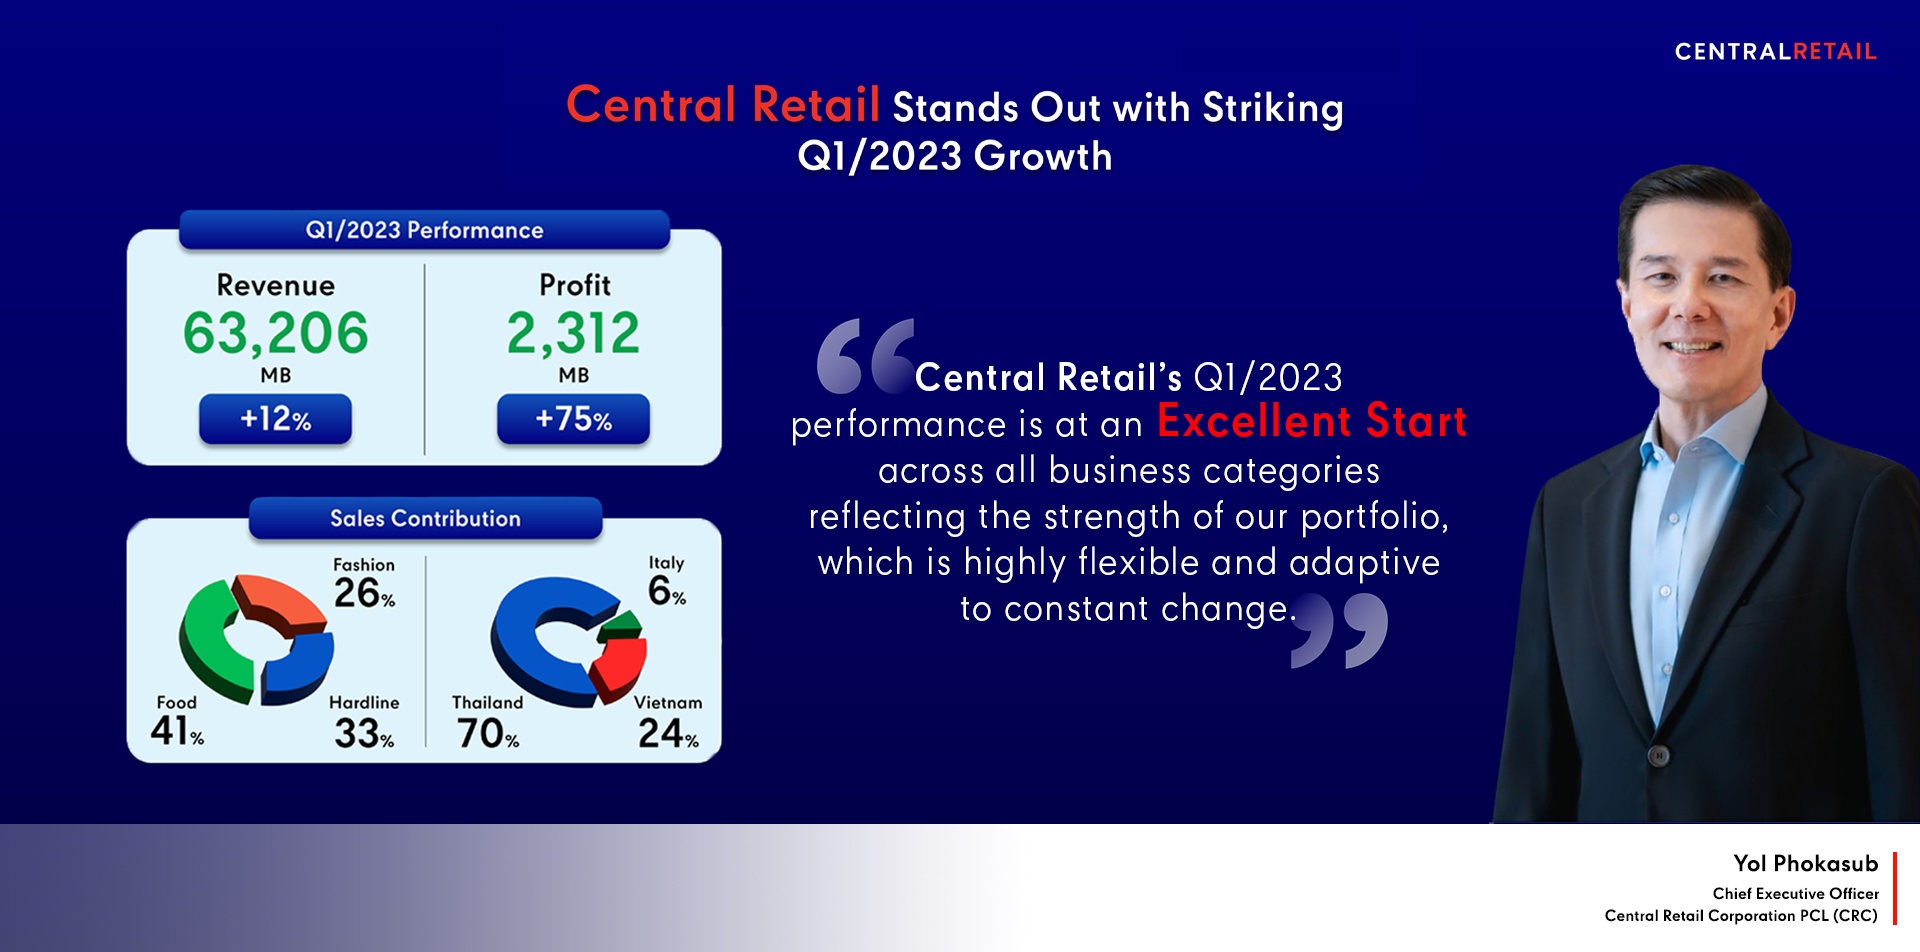 Central Retail achieves robust growth in Q1 with a revenue of THB 63,206 million (+12%) and a profit of THB 2,312 million (+75%)